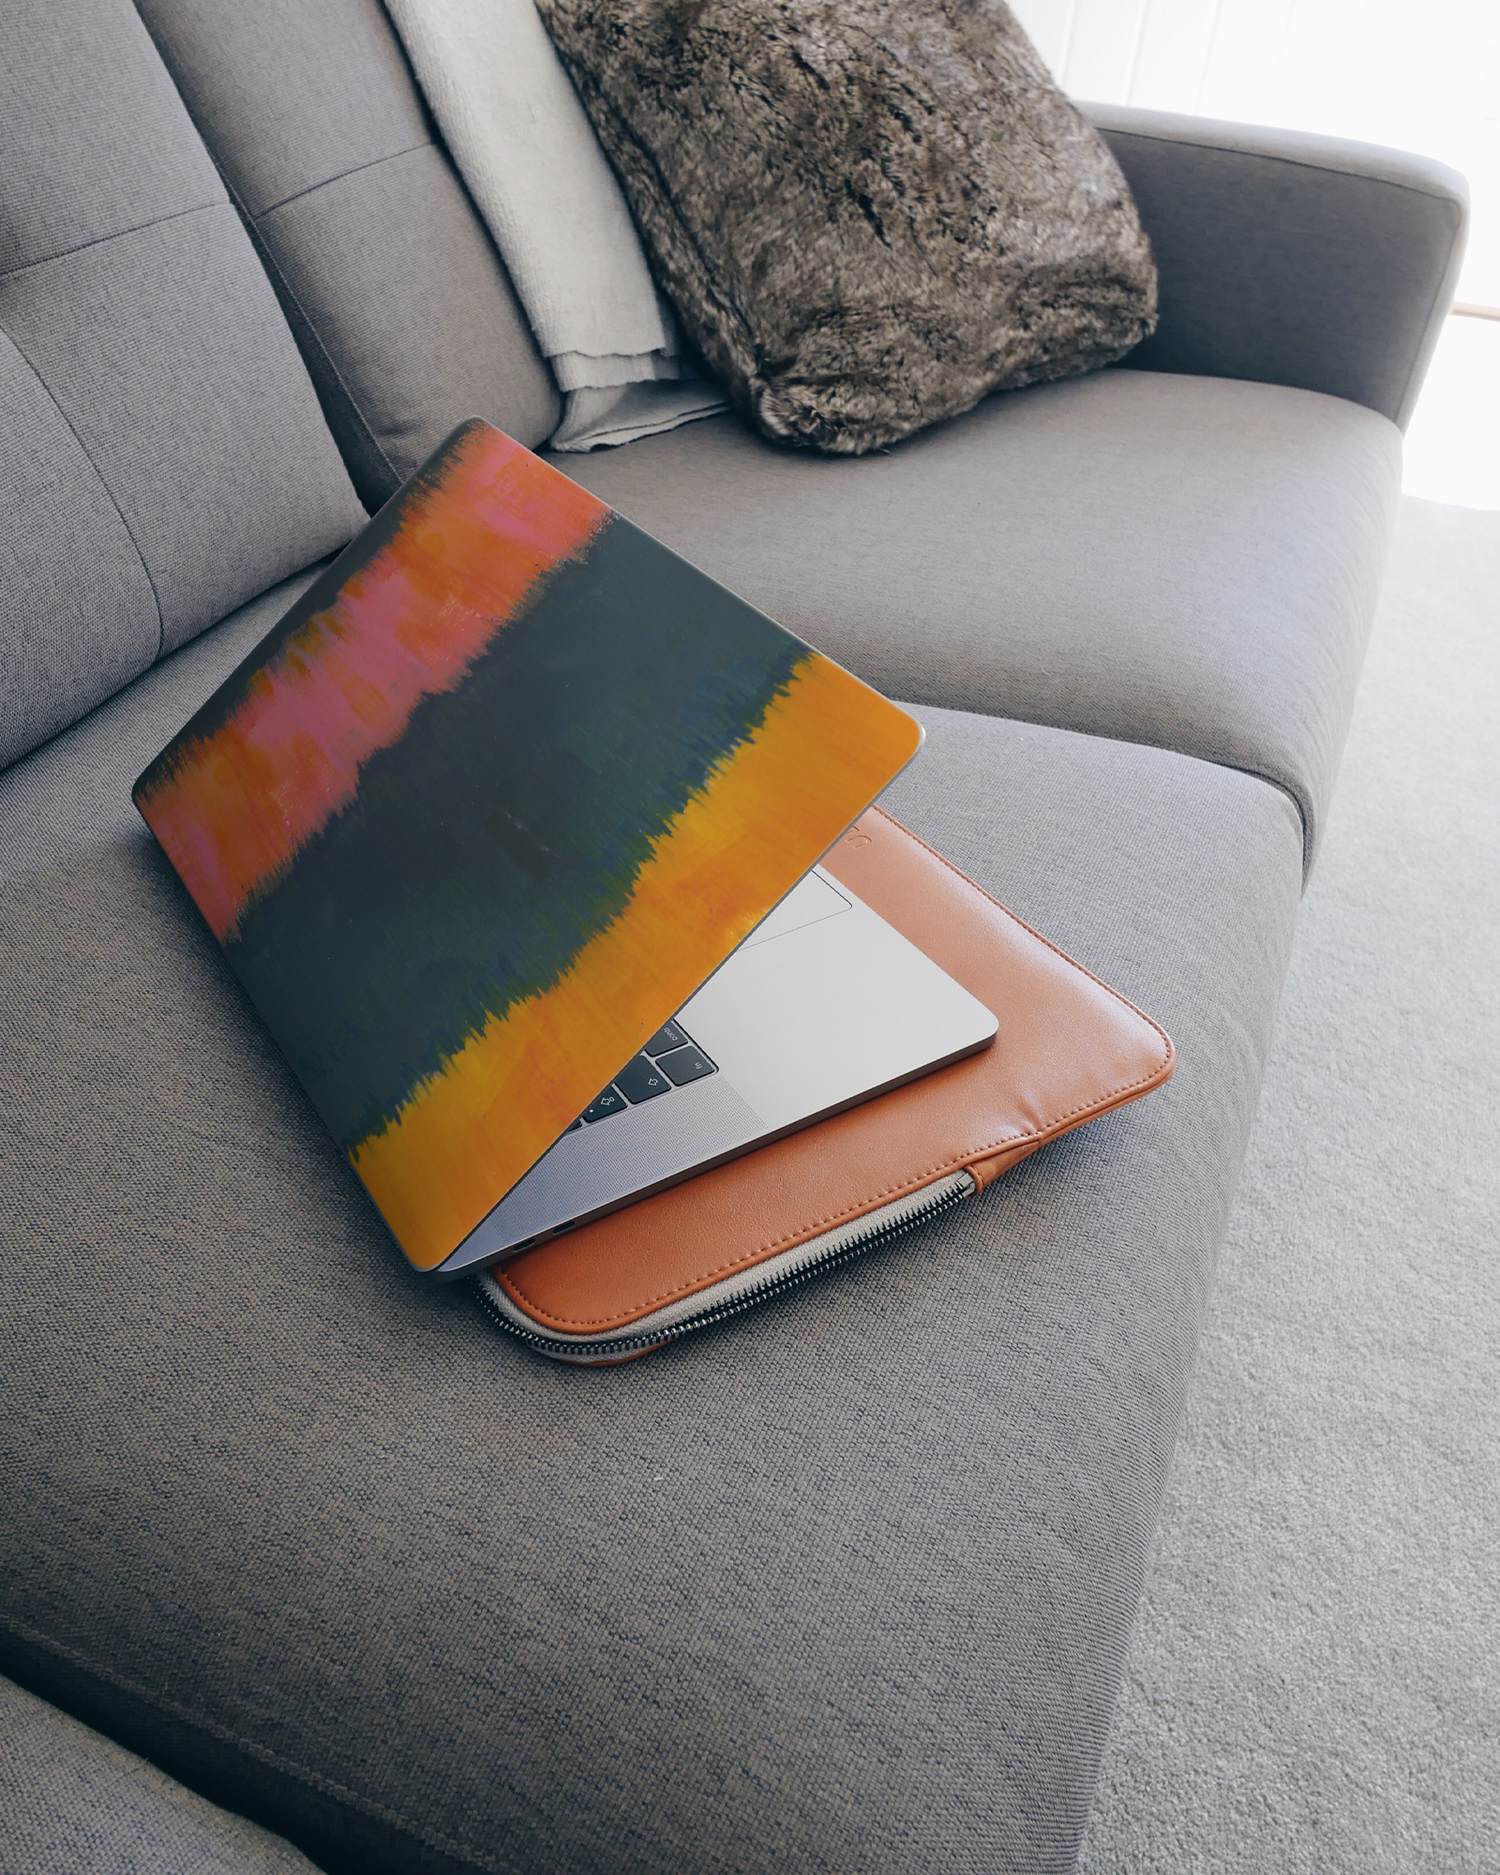 Ombre Gradient Laptop Skin for 15 inch Apple MacBooks on a couch